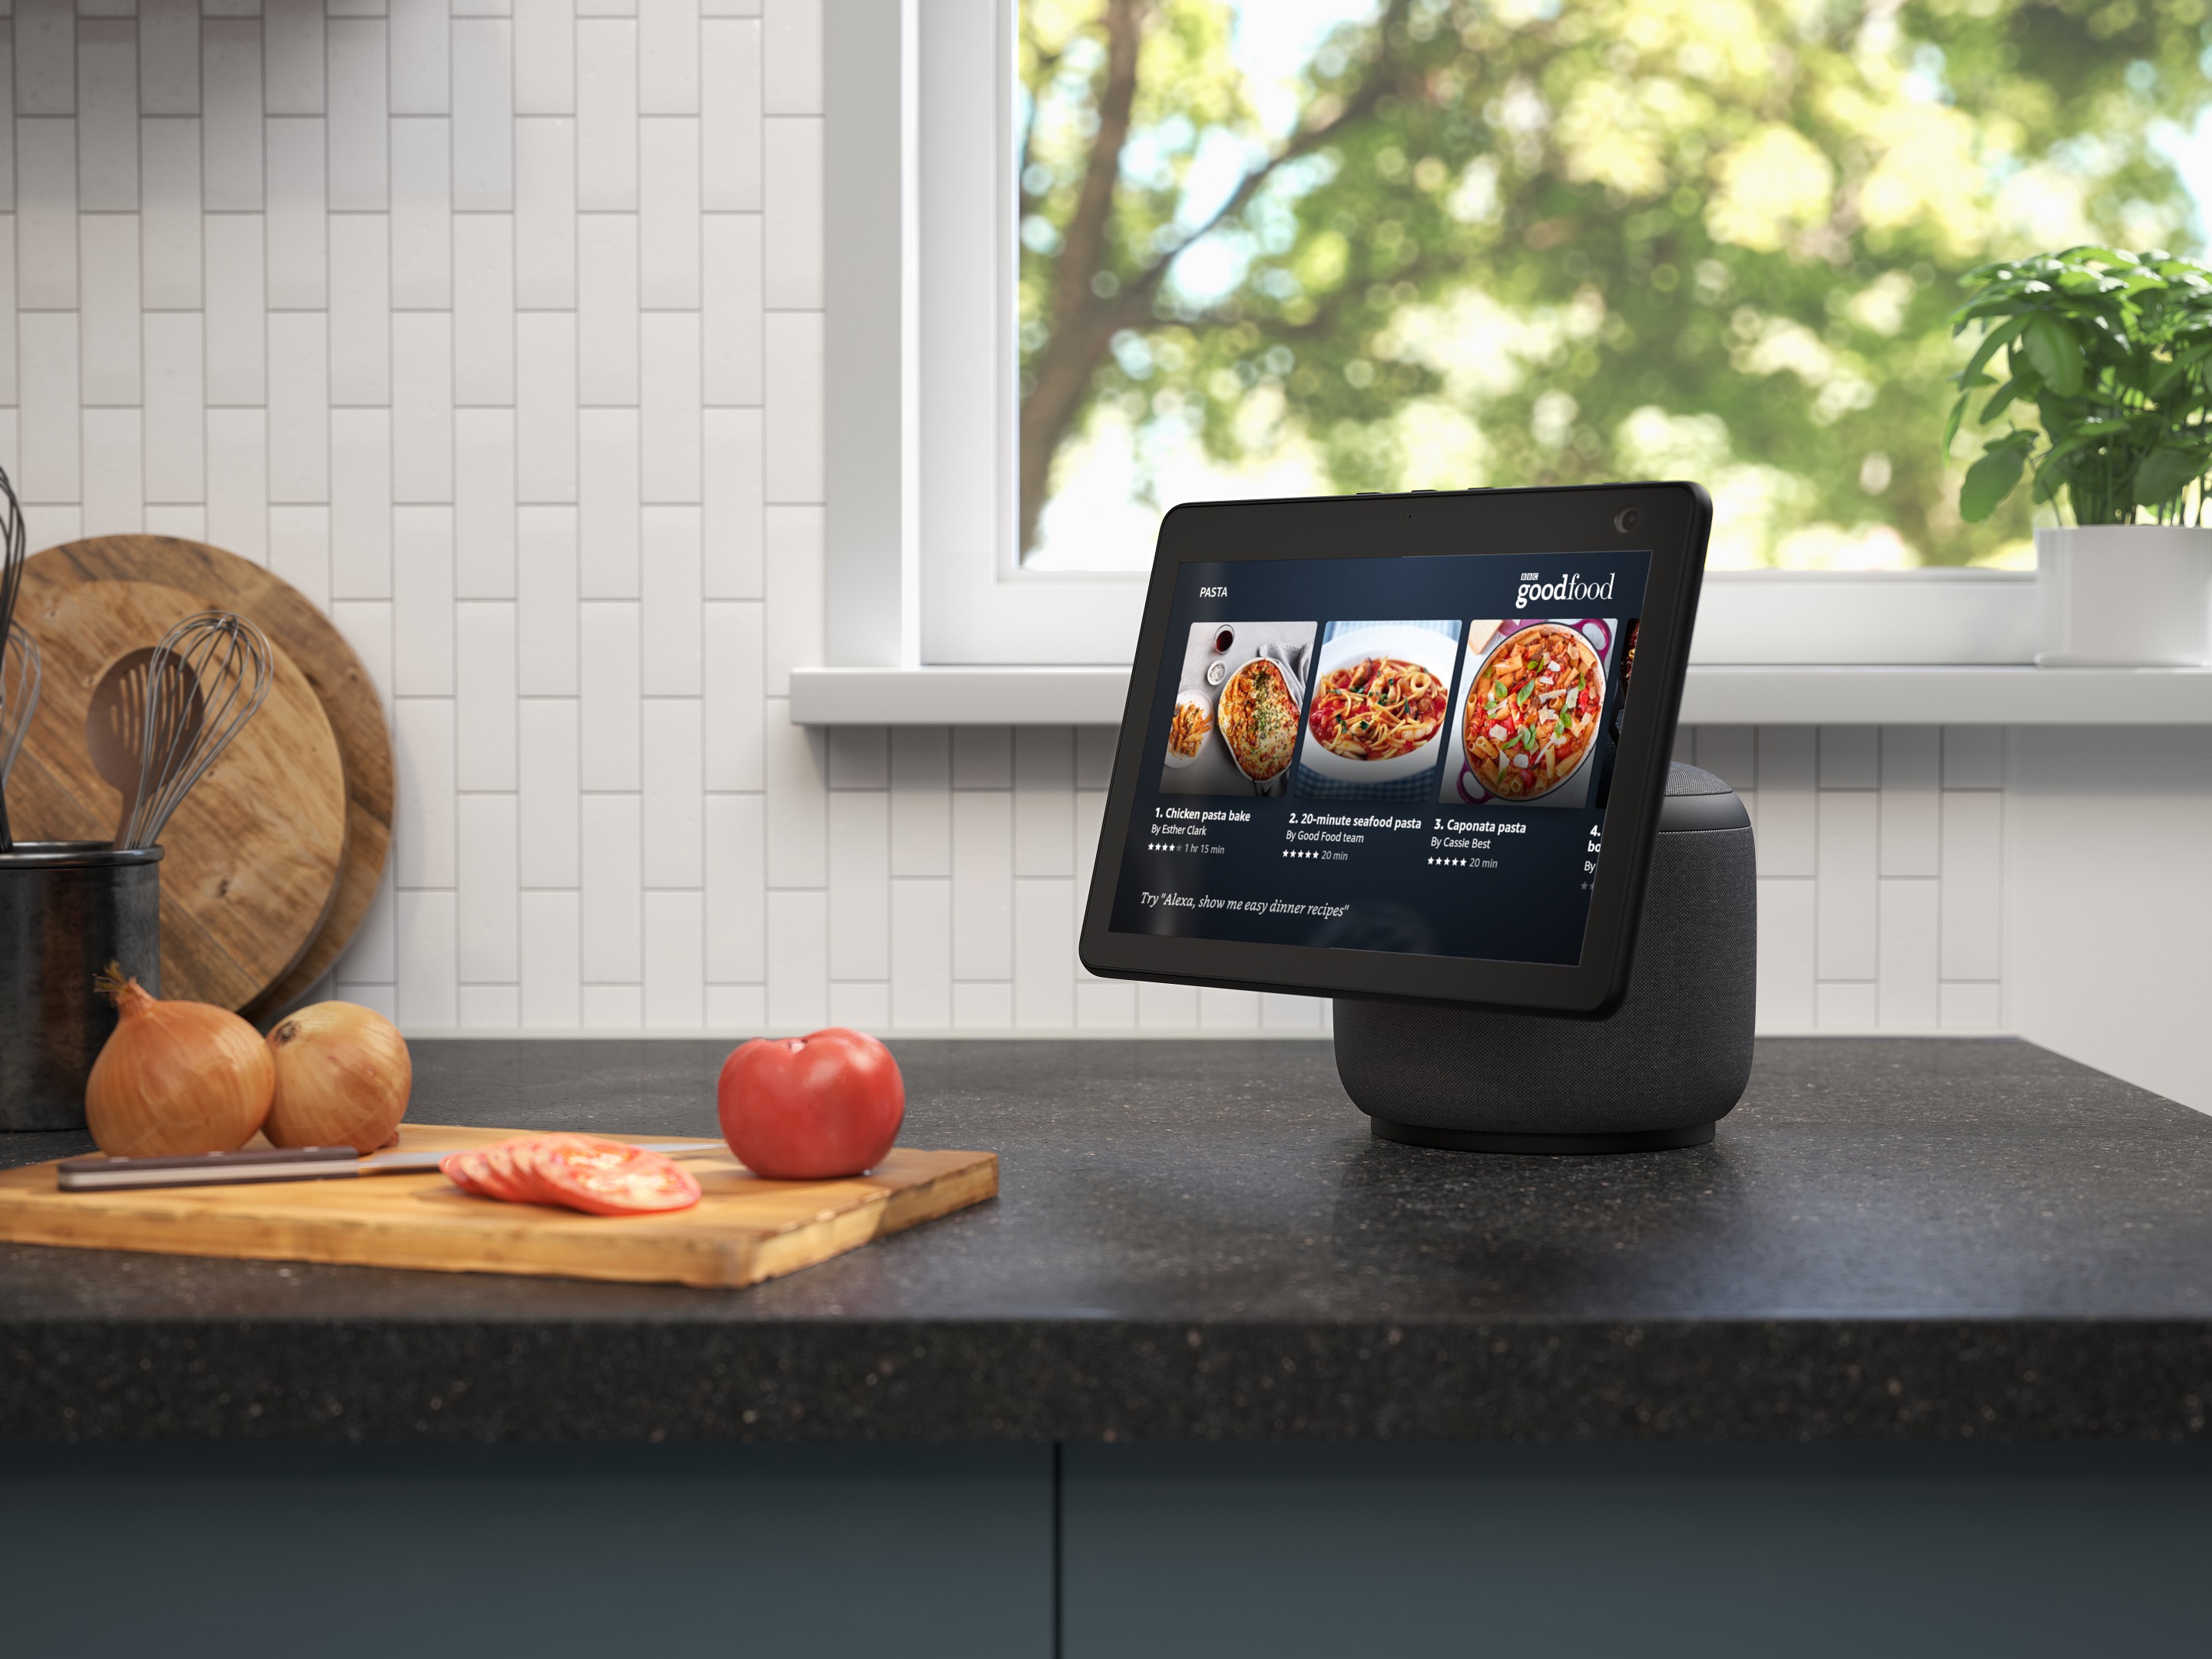 The new Echo Show 10